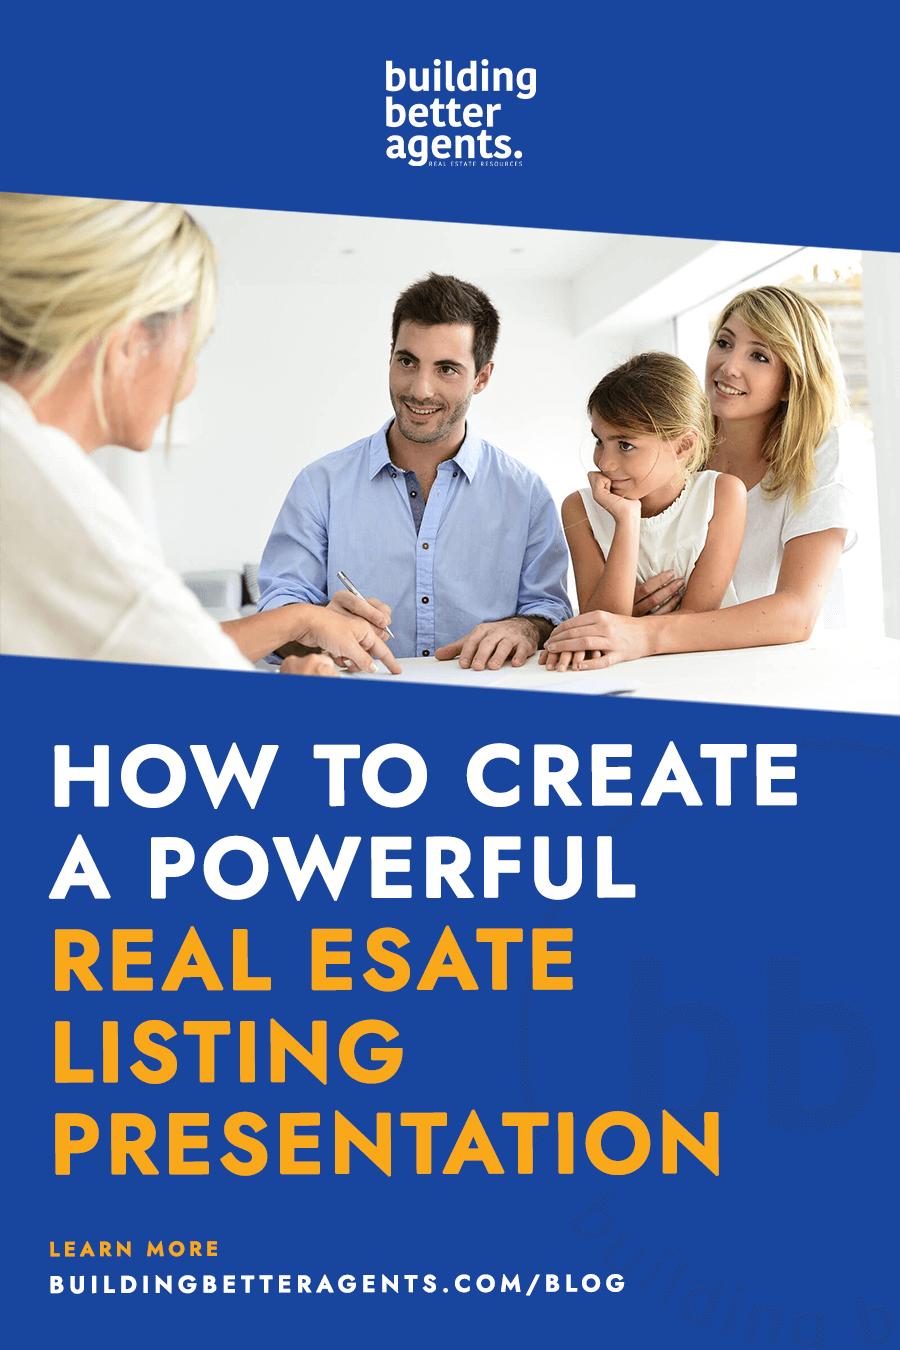 How To Create a Powerful Real Estate Listing Presentation